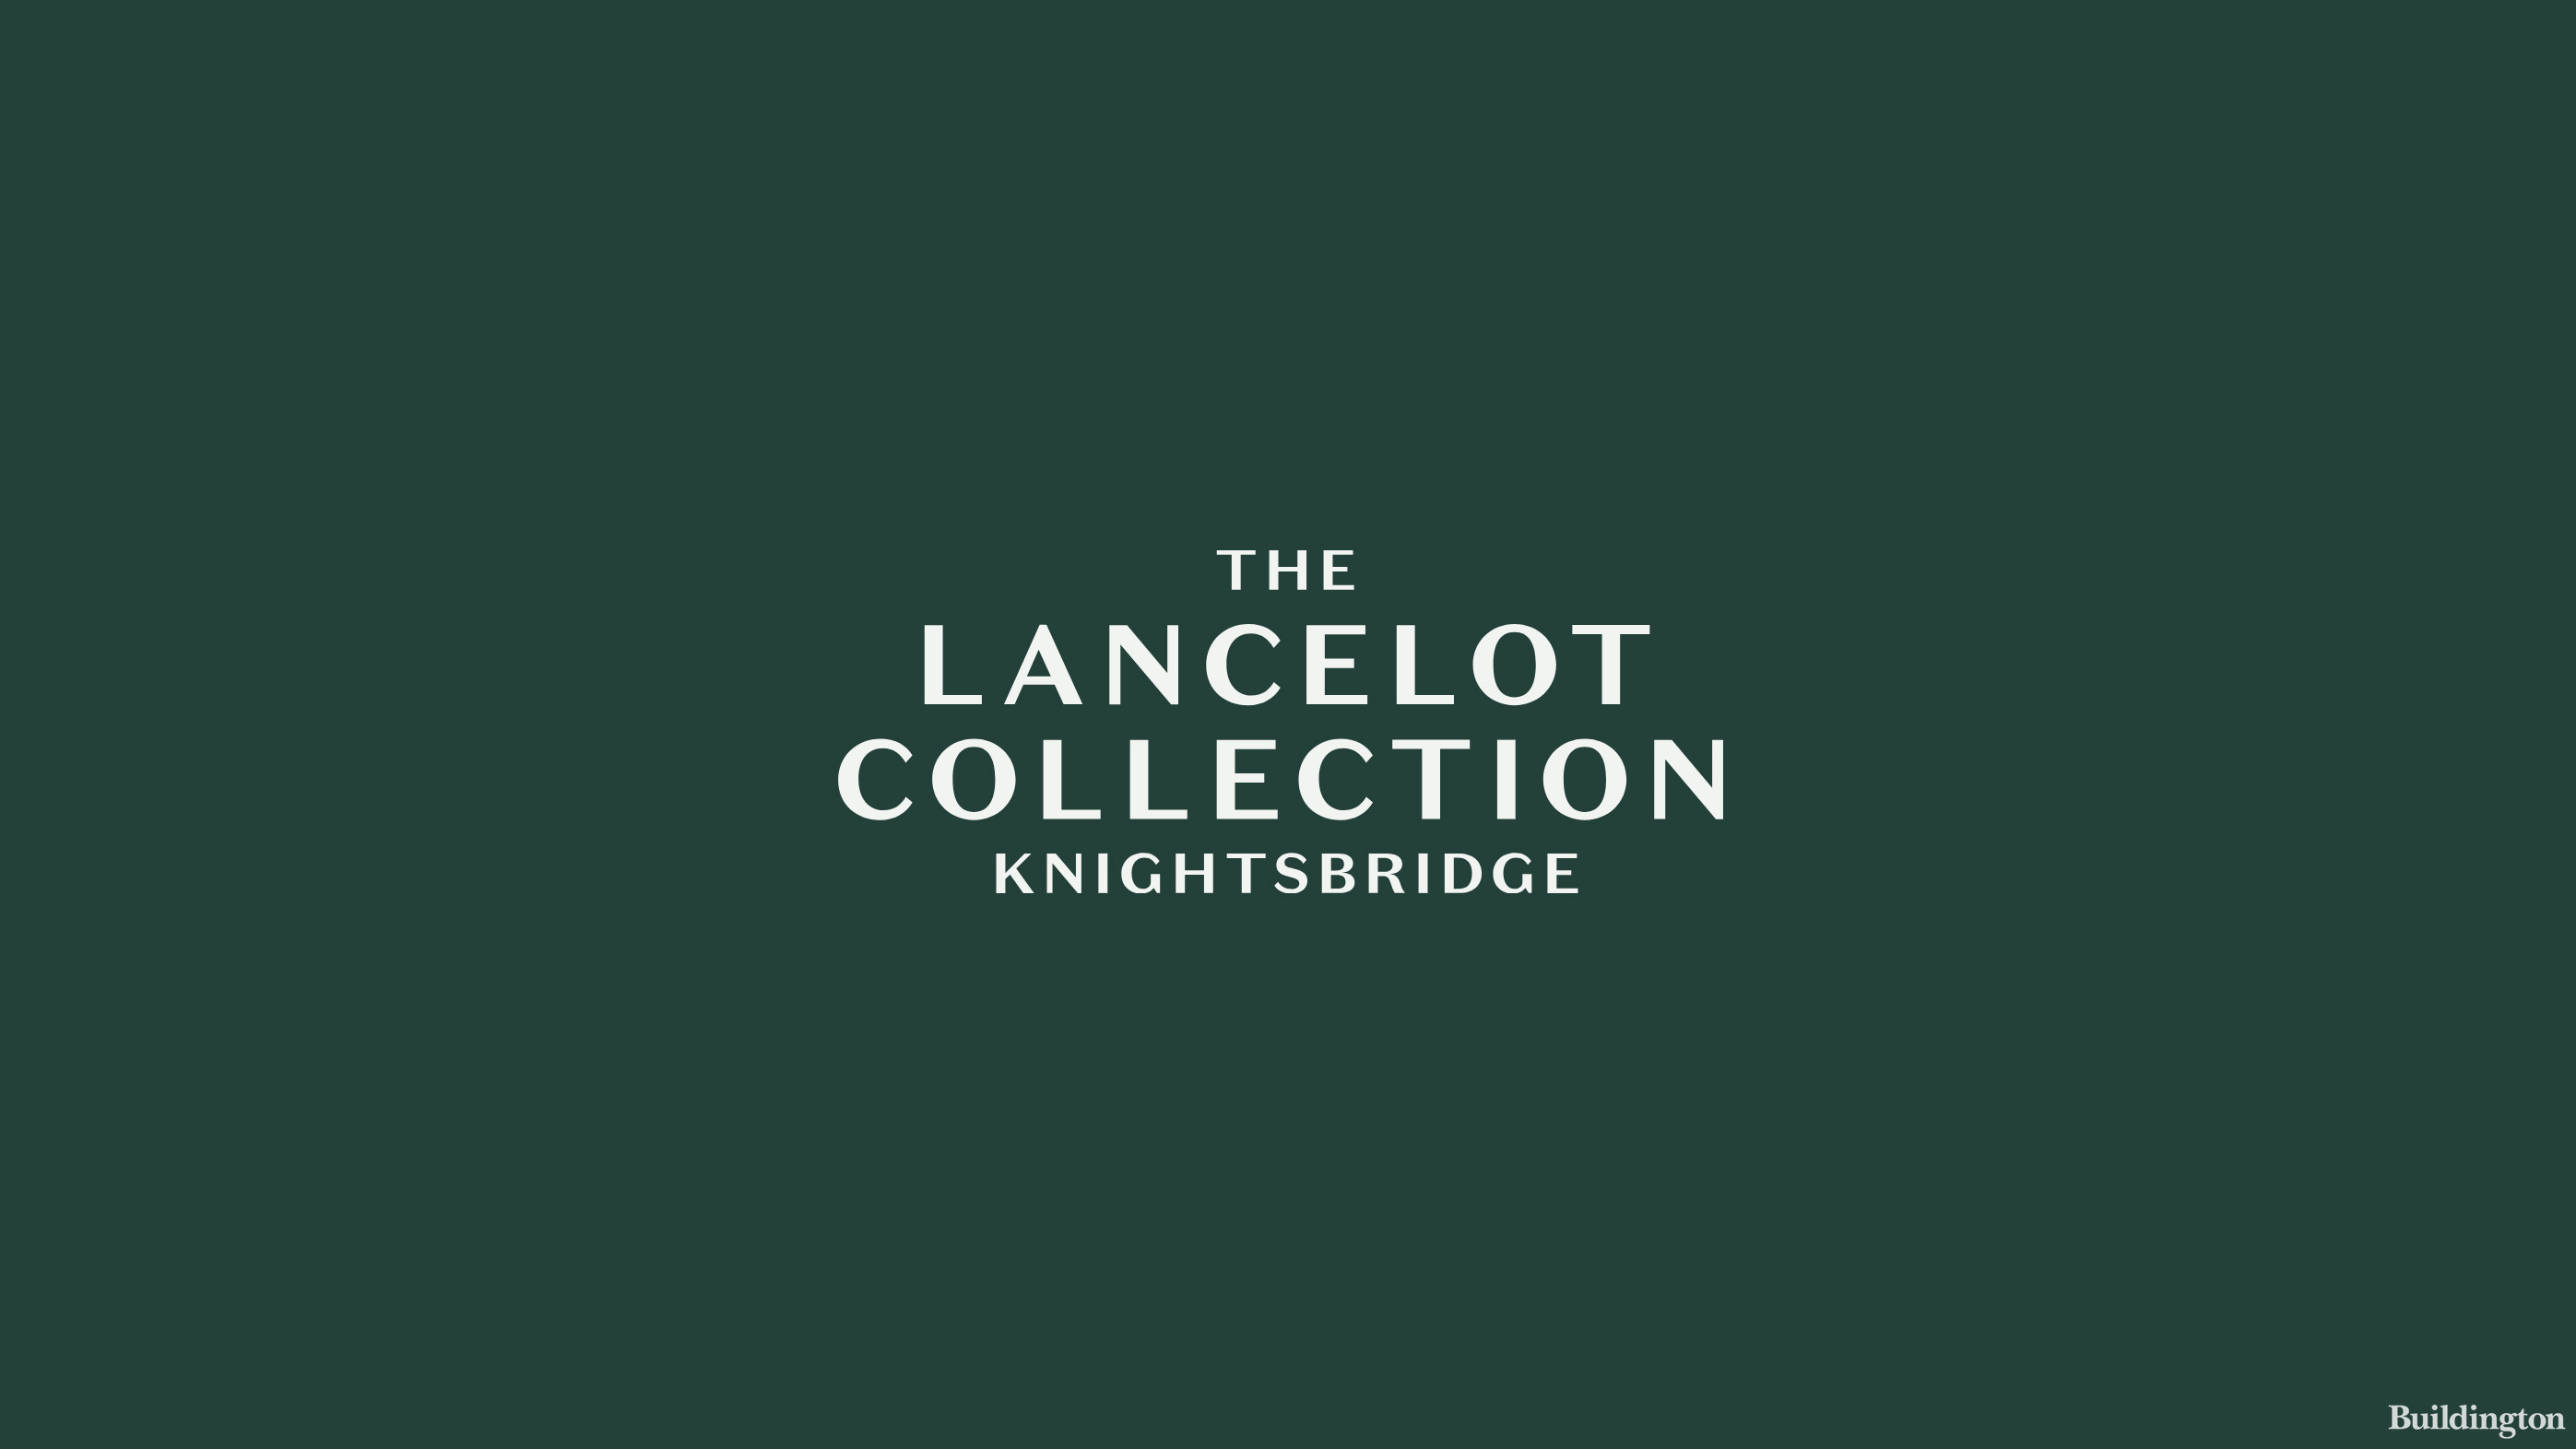 The Lancelot Collection development of townhouses in Knightsbridge, London SW7